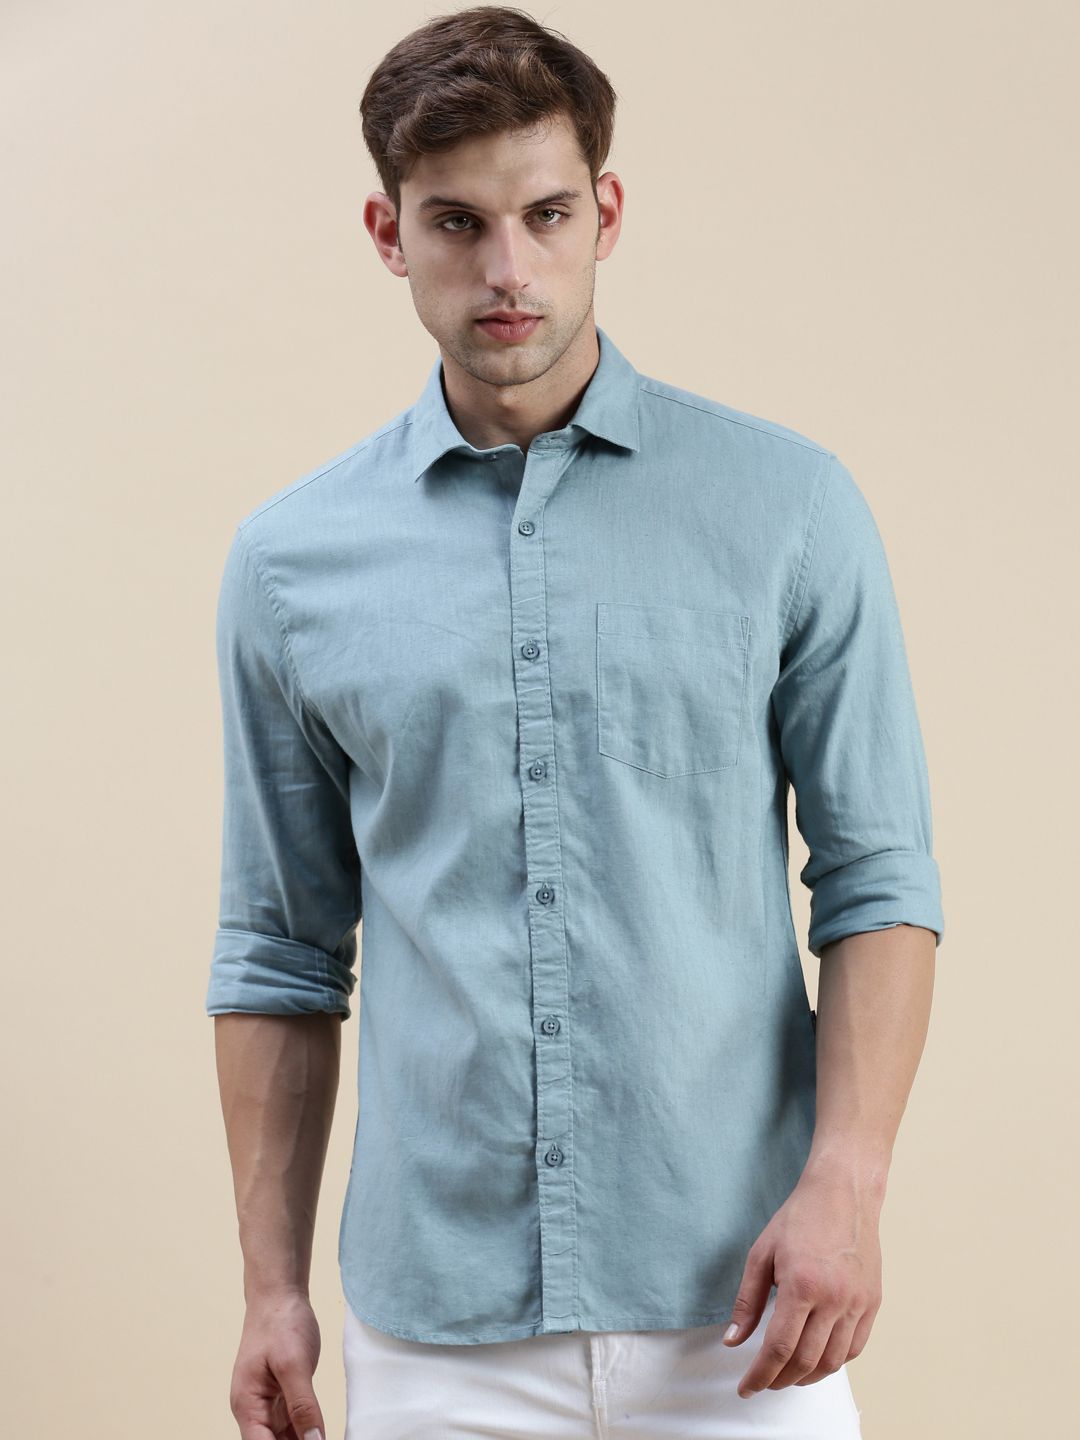     			Showoff Cotton Blend Regular Fit Solids Full Sleeves Men's Casual Shirt - Teal ( Pack of 1 )